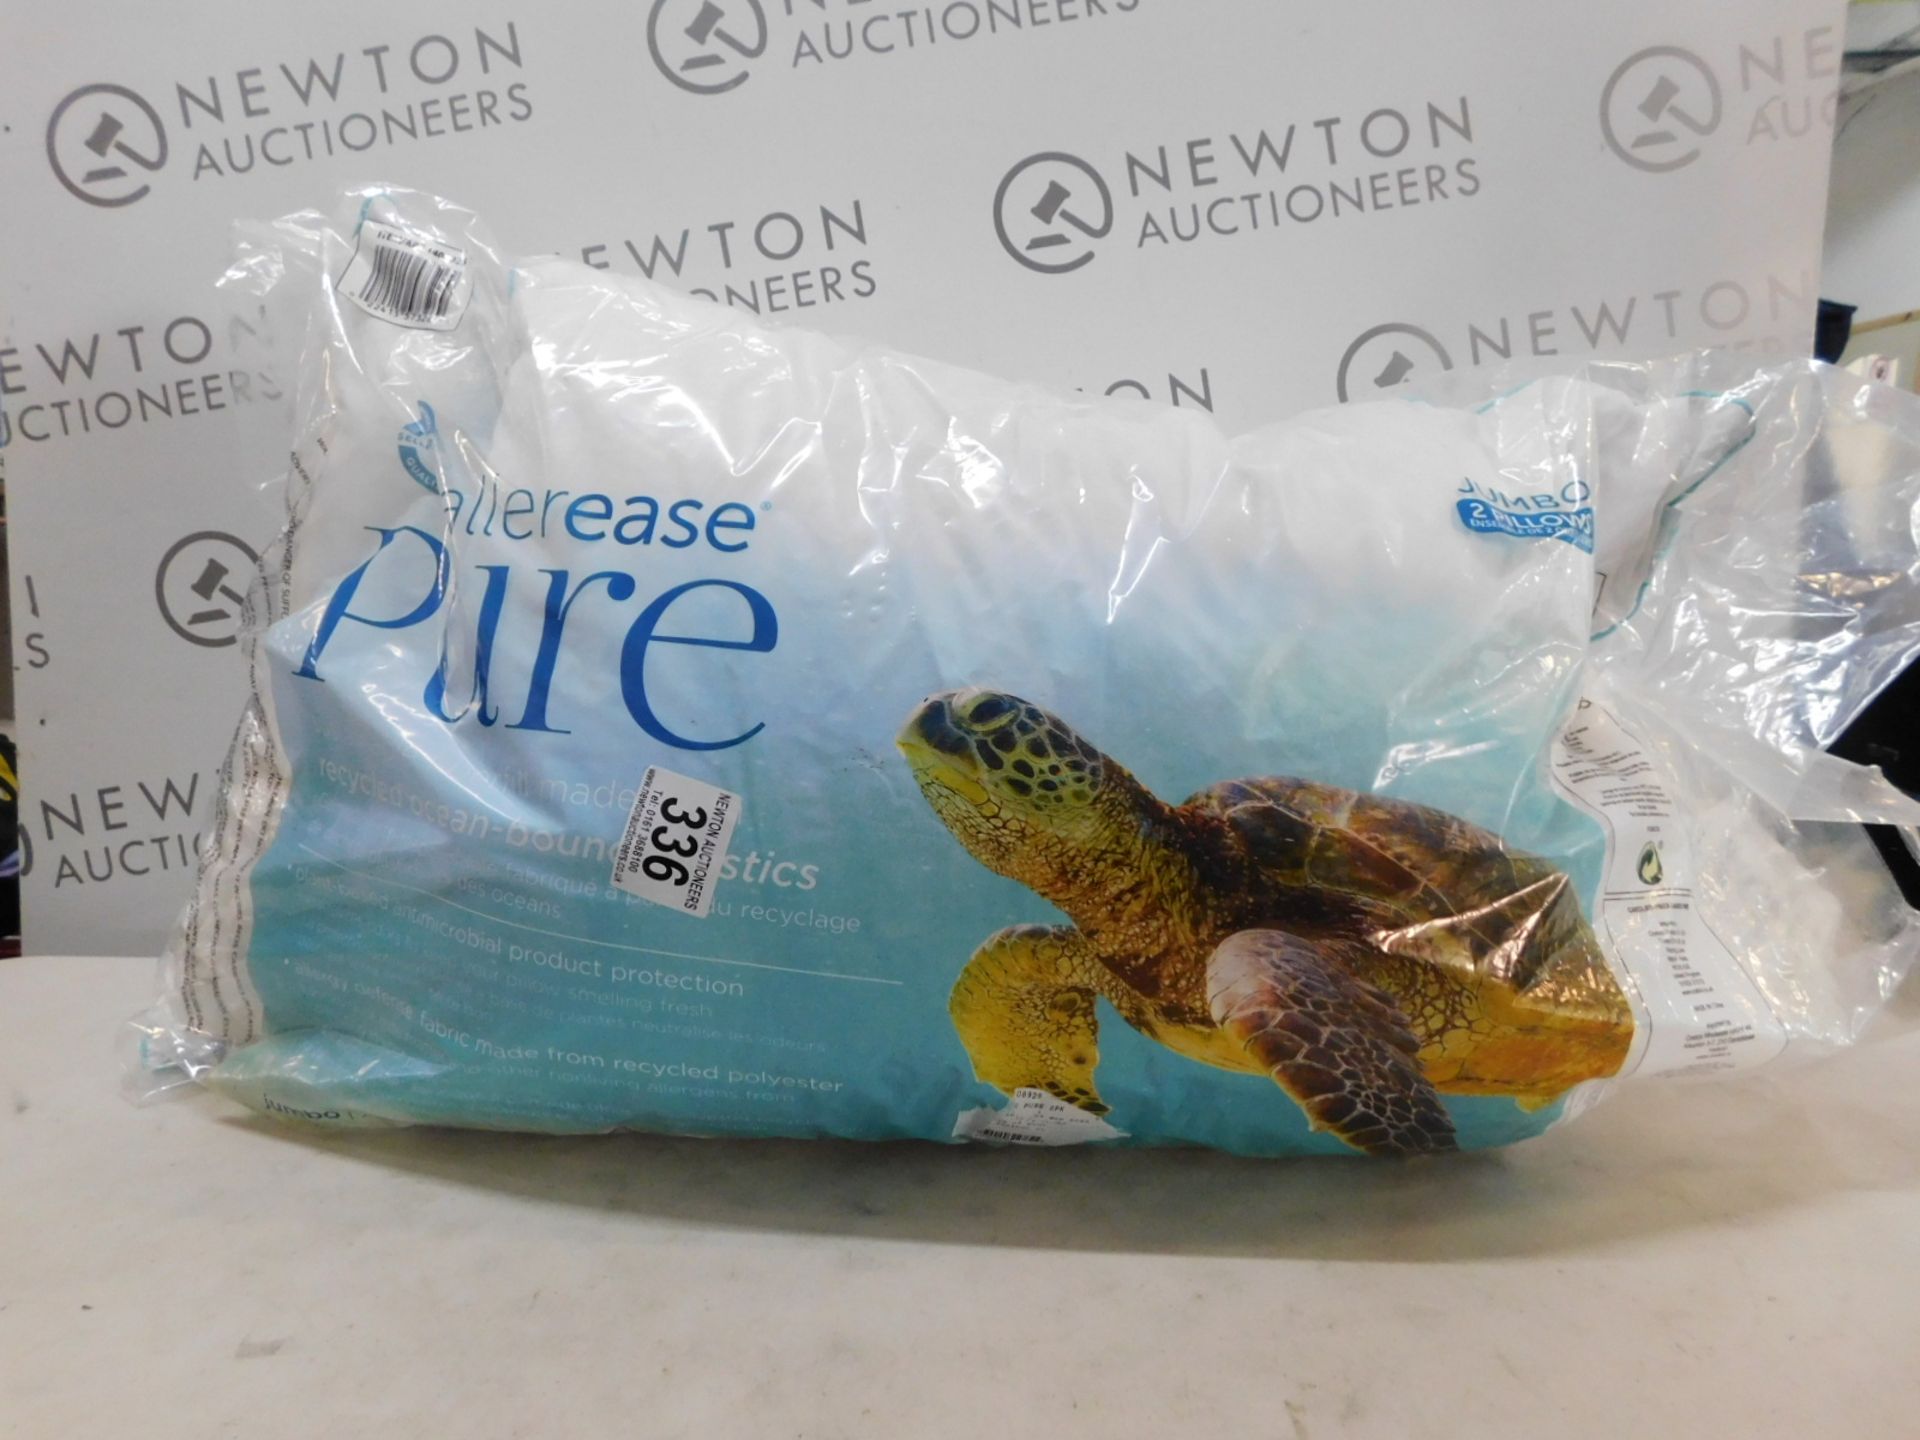 1 BAGGED PAIR OF ALLEREASE PURE PILLOWS RRP Â£19.99